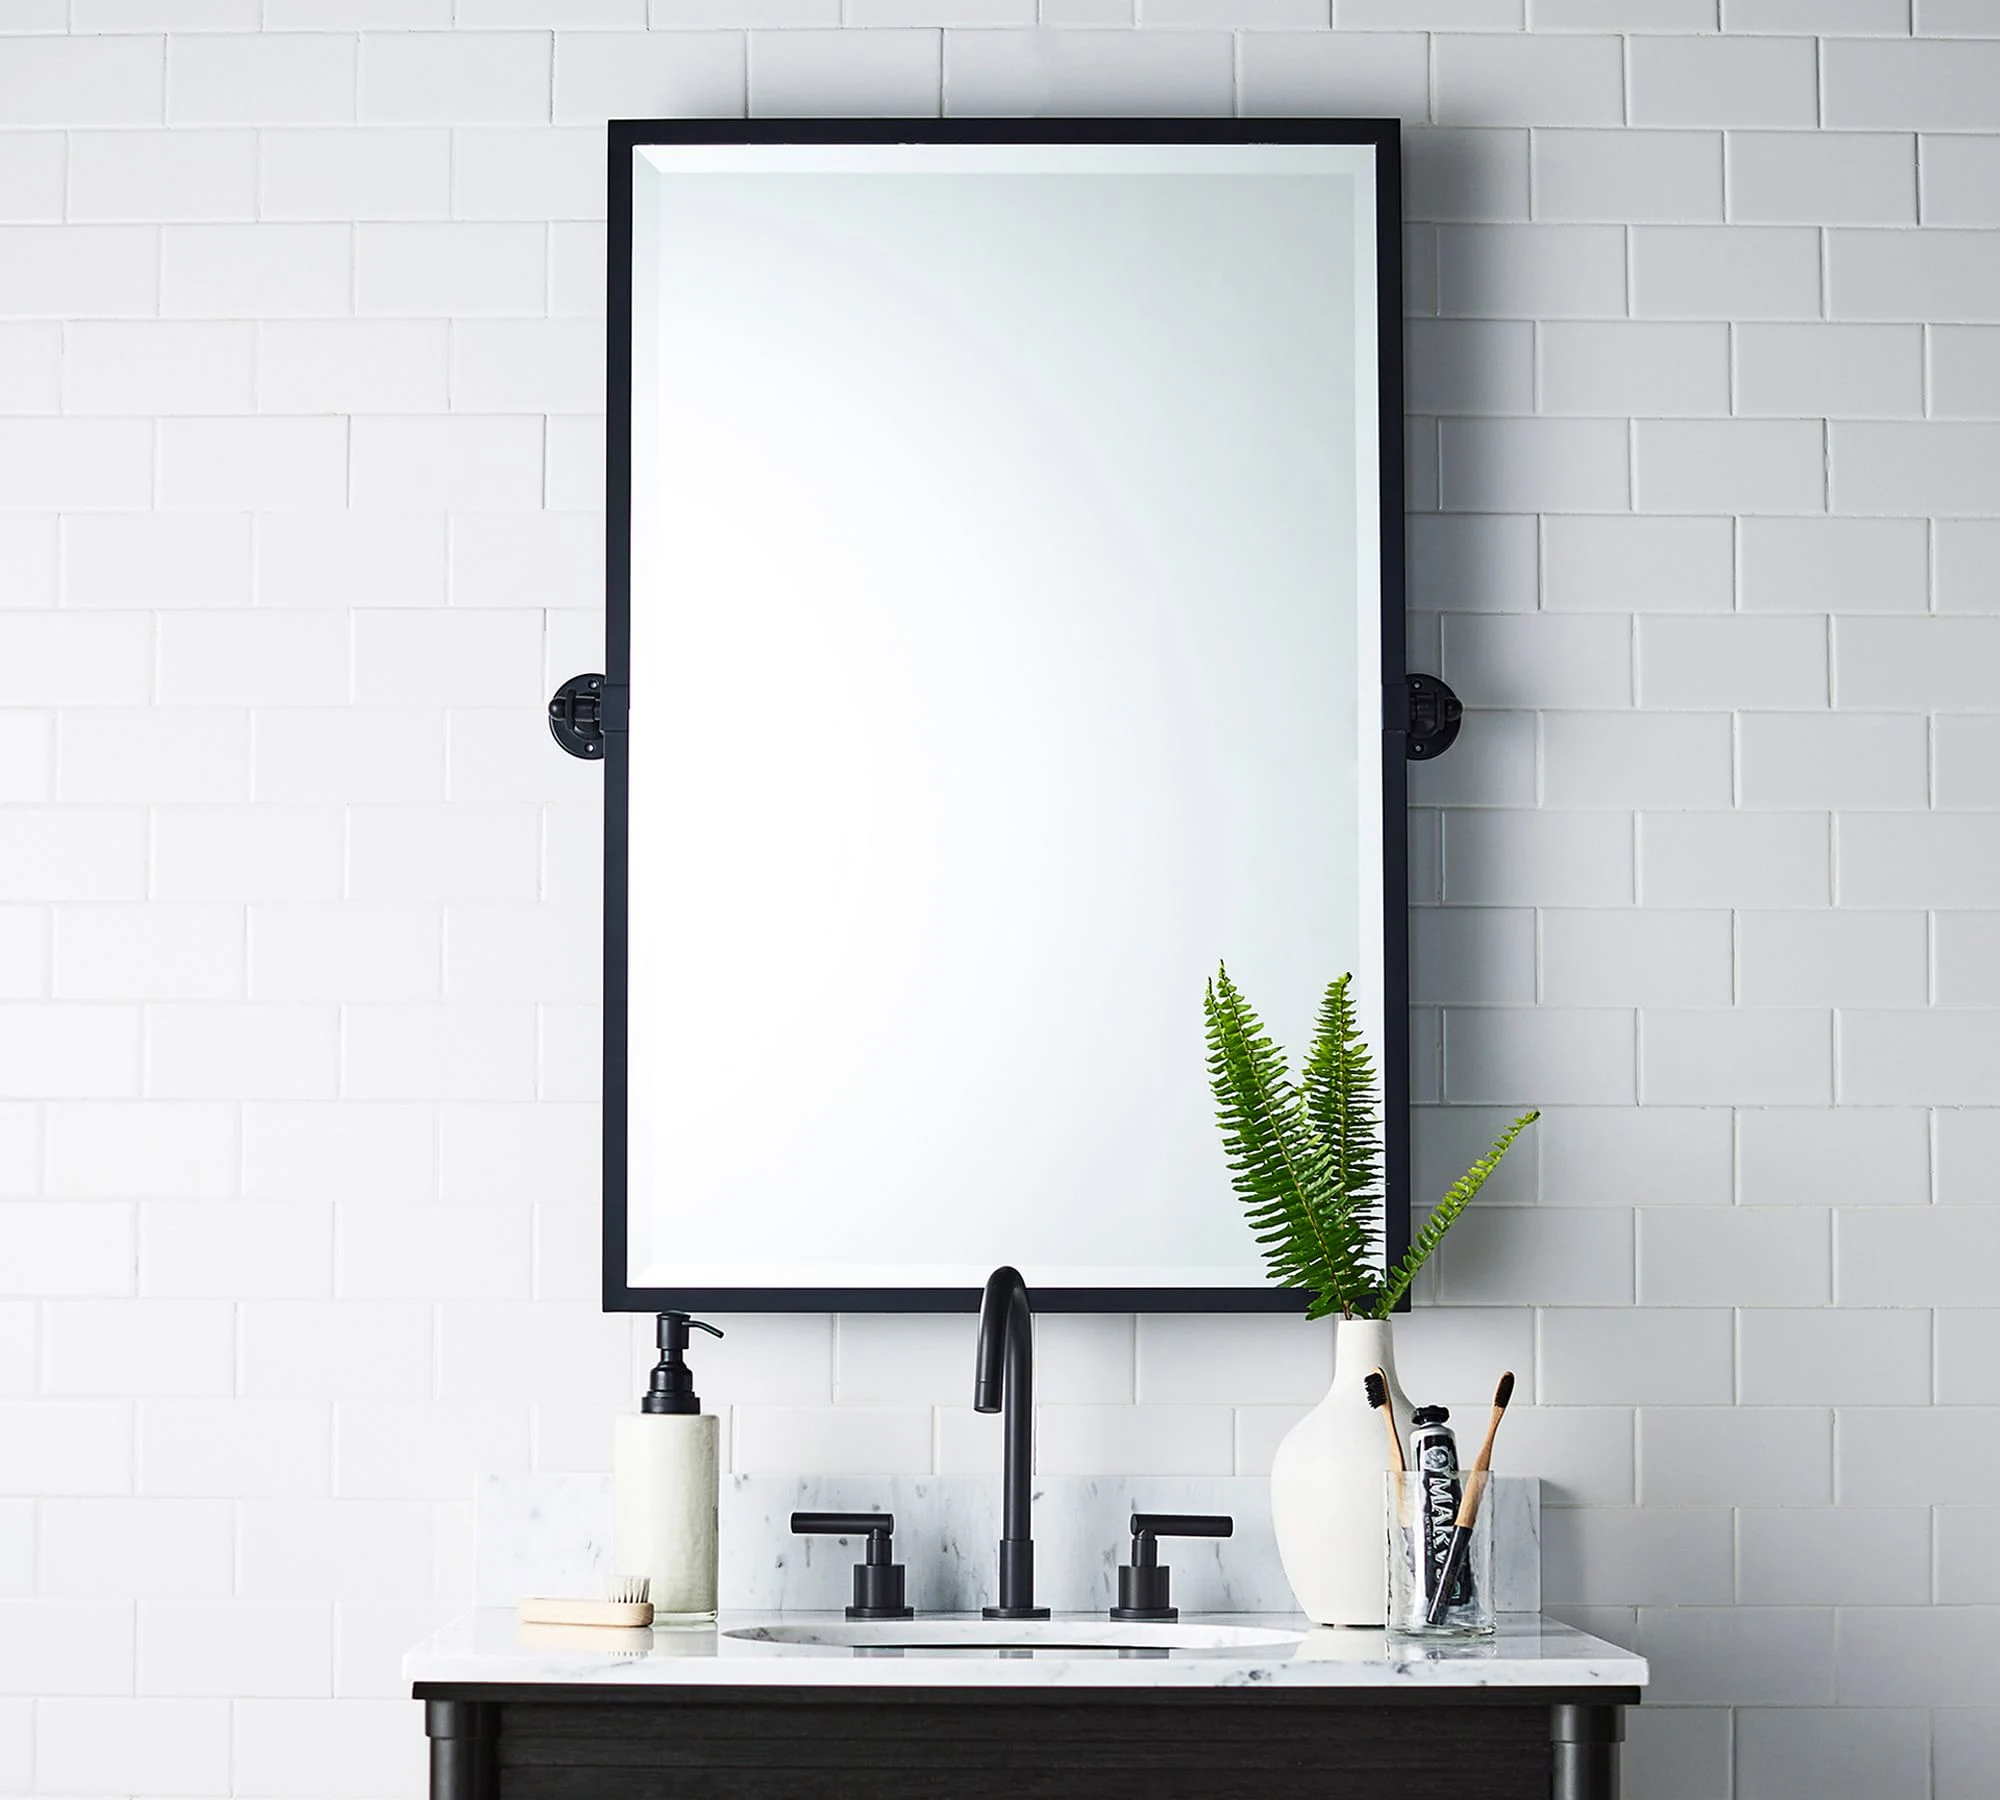 Classical Rounded Rectangle Big Black Metal Framed Bathroom Vanity Mirror for Wall